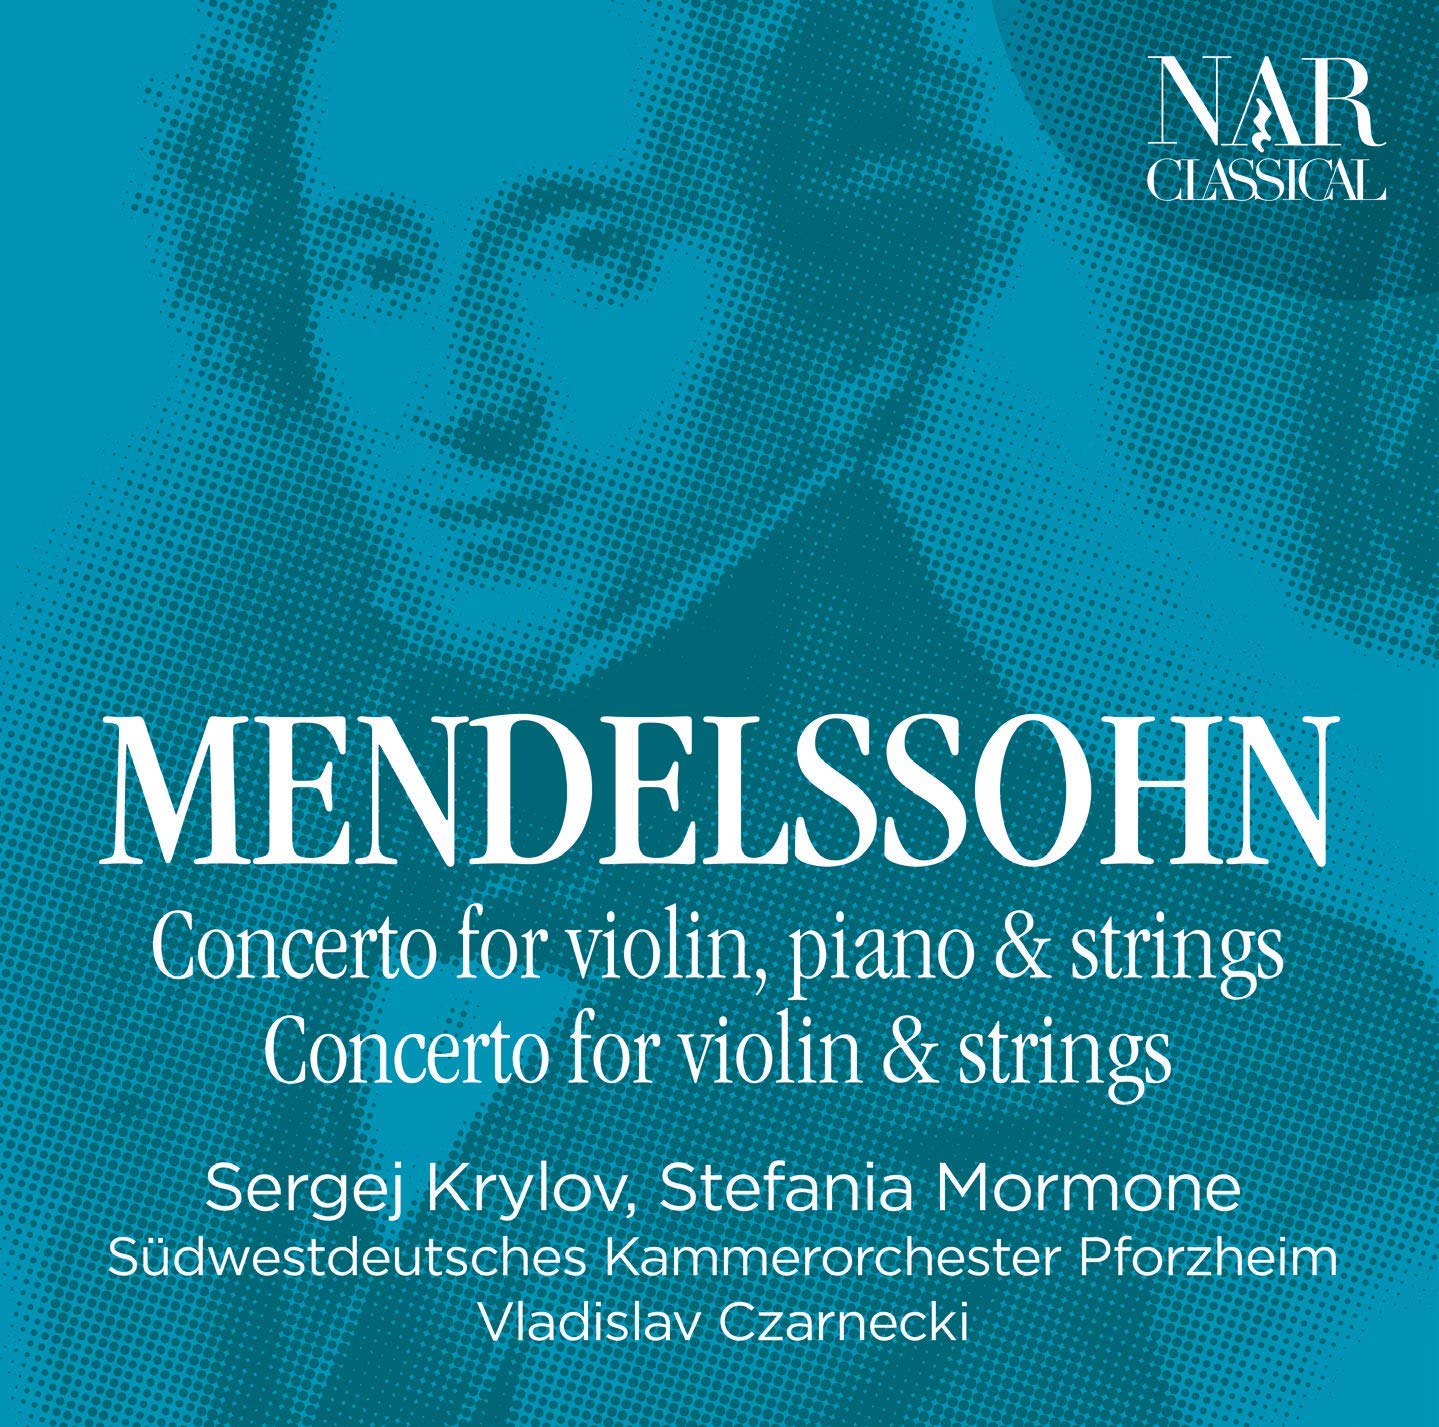 CONCERTO FOR PIANO, VIOLIN AND STRINGS